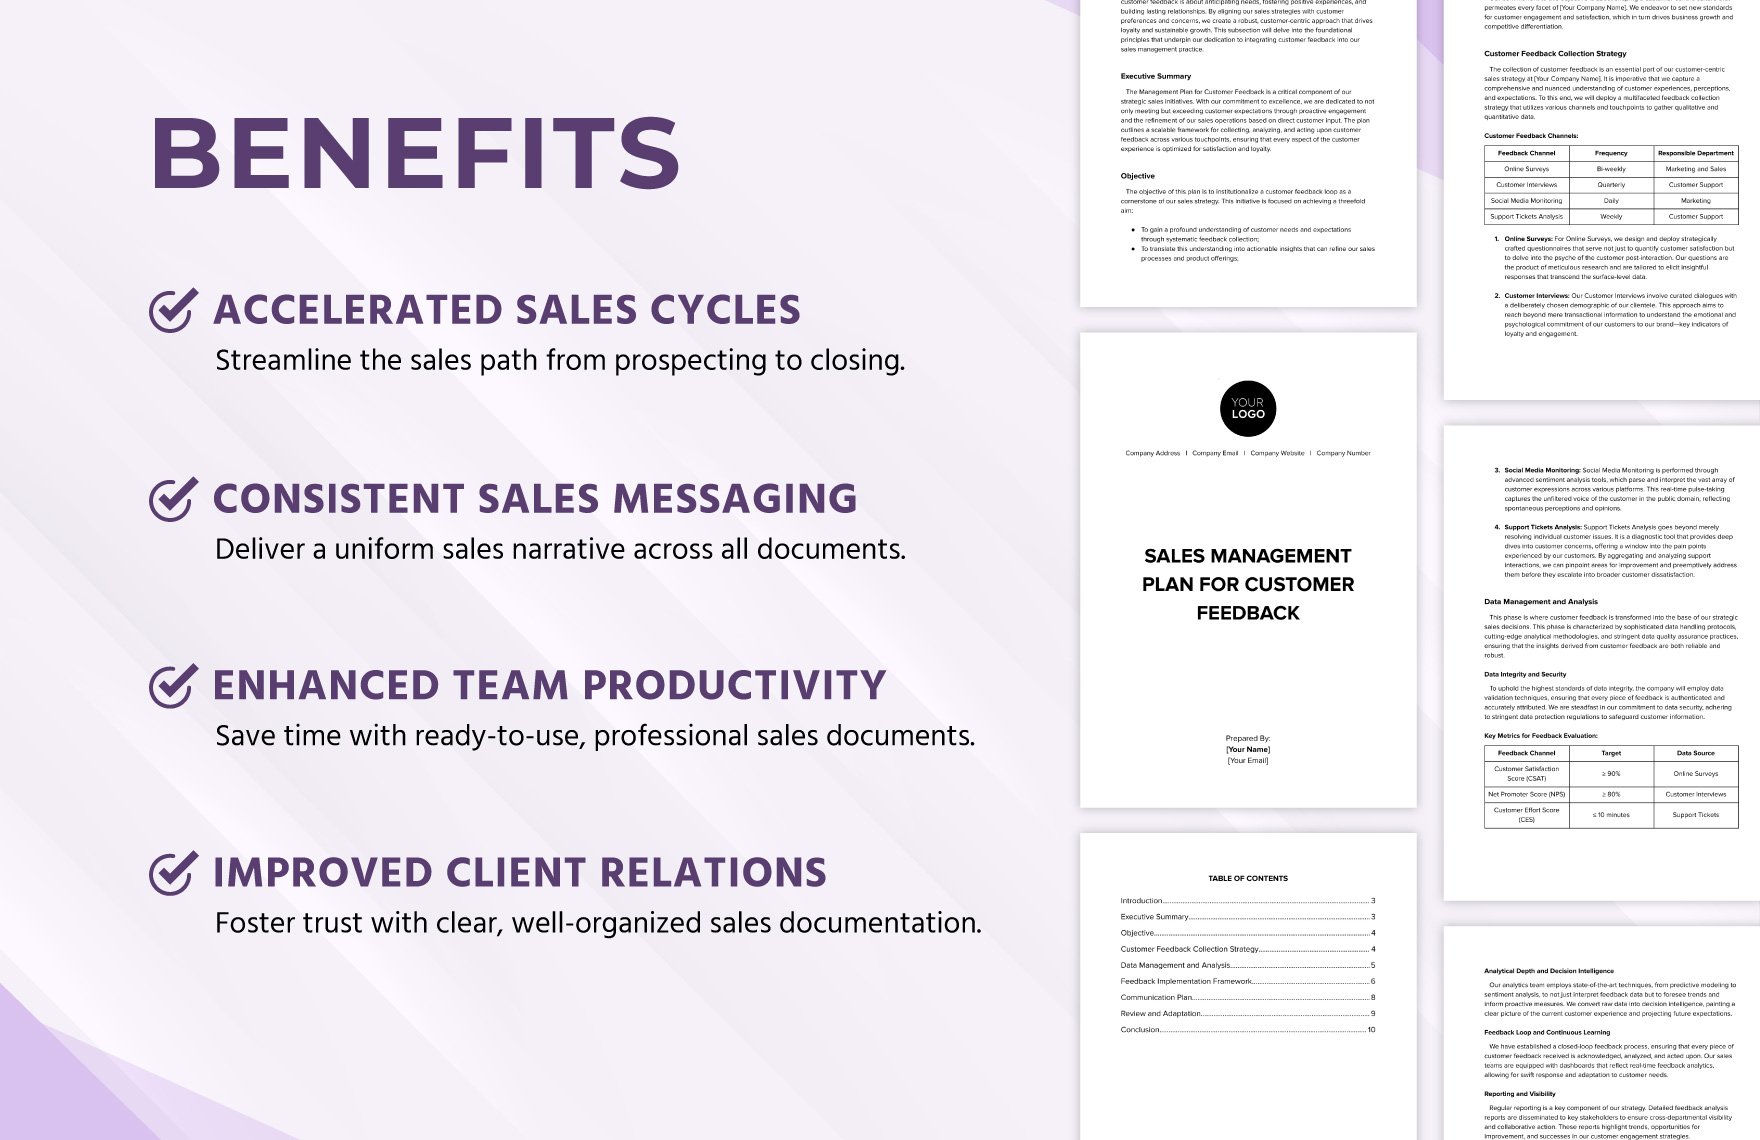 Sales Management Plan for Customer Feedback Template